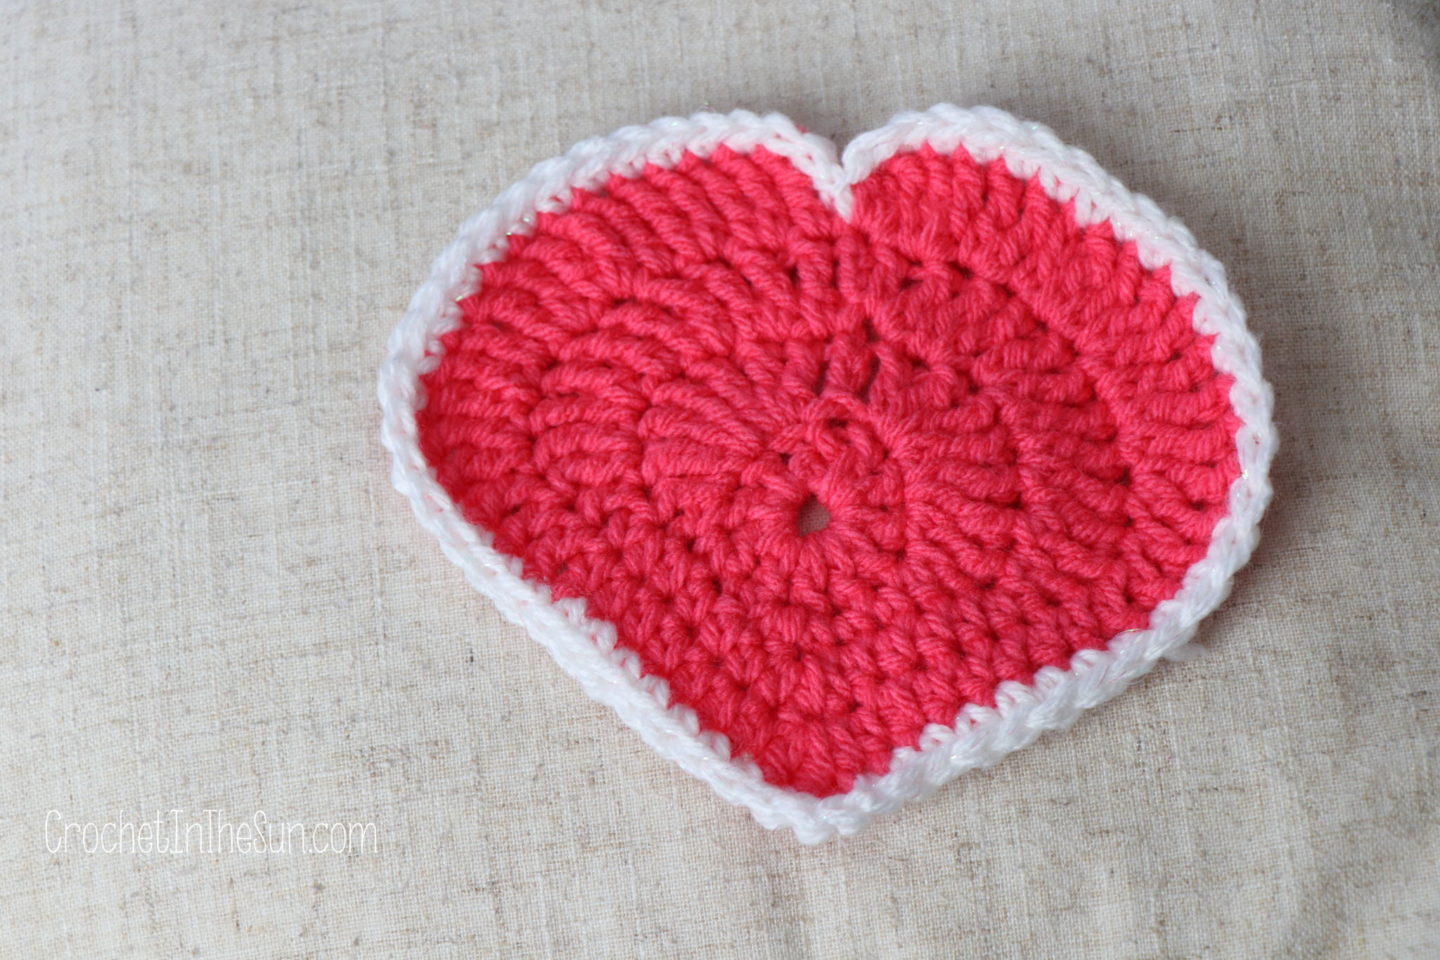 How to crochet a hearts with a border. A beginner's guide to crocheting hearts